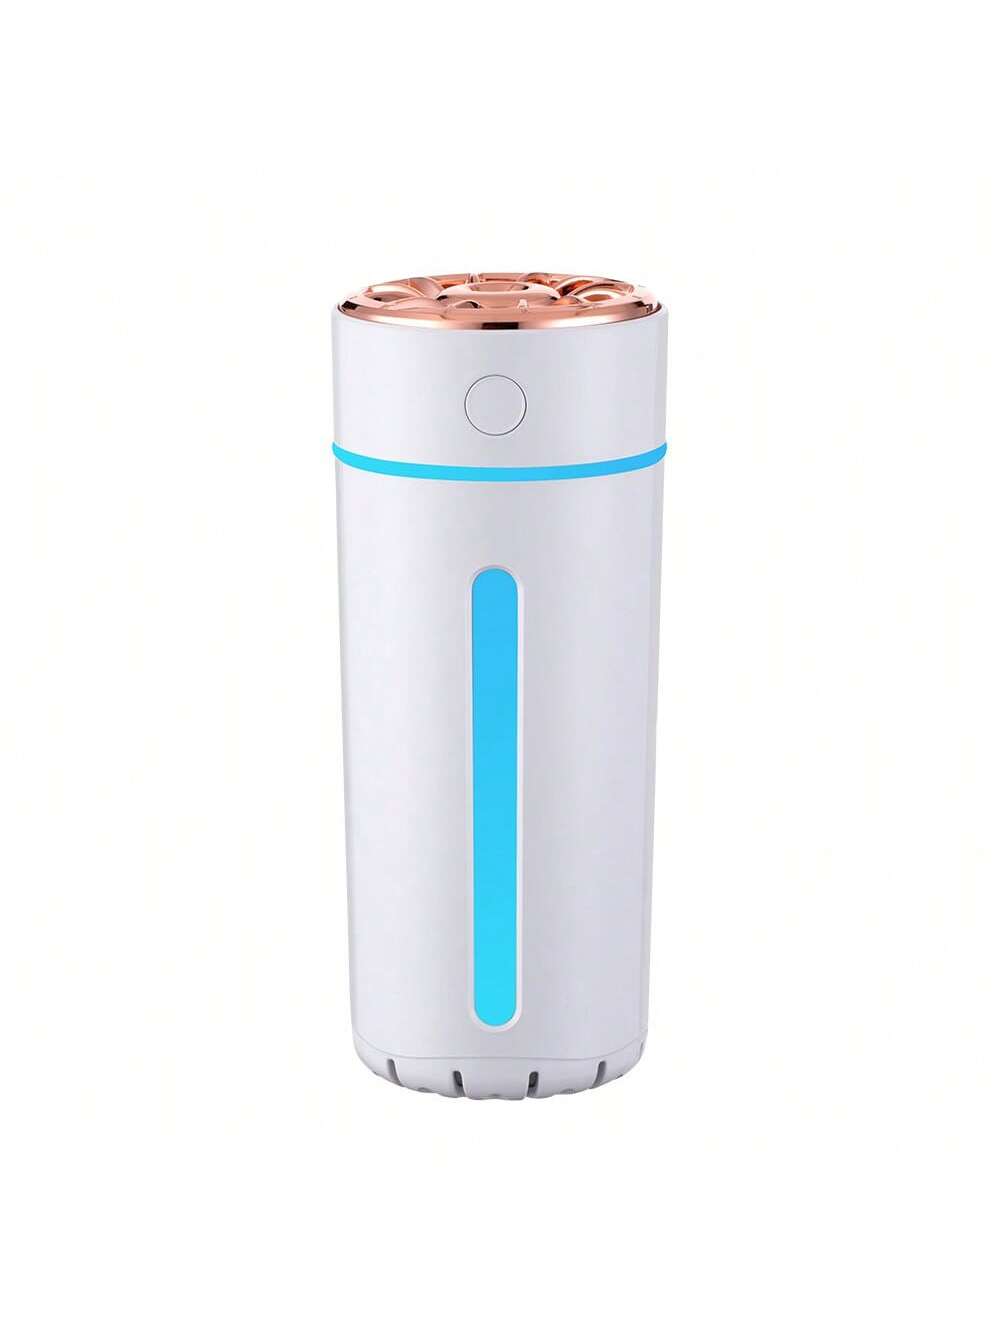 New Style Mini Usb Humidifier For Home Office & Car, Aroma Diffuser Creative Gift-White-1